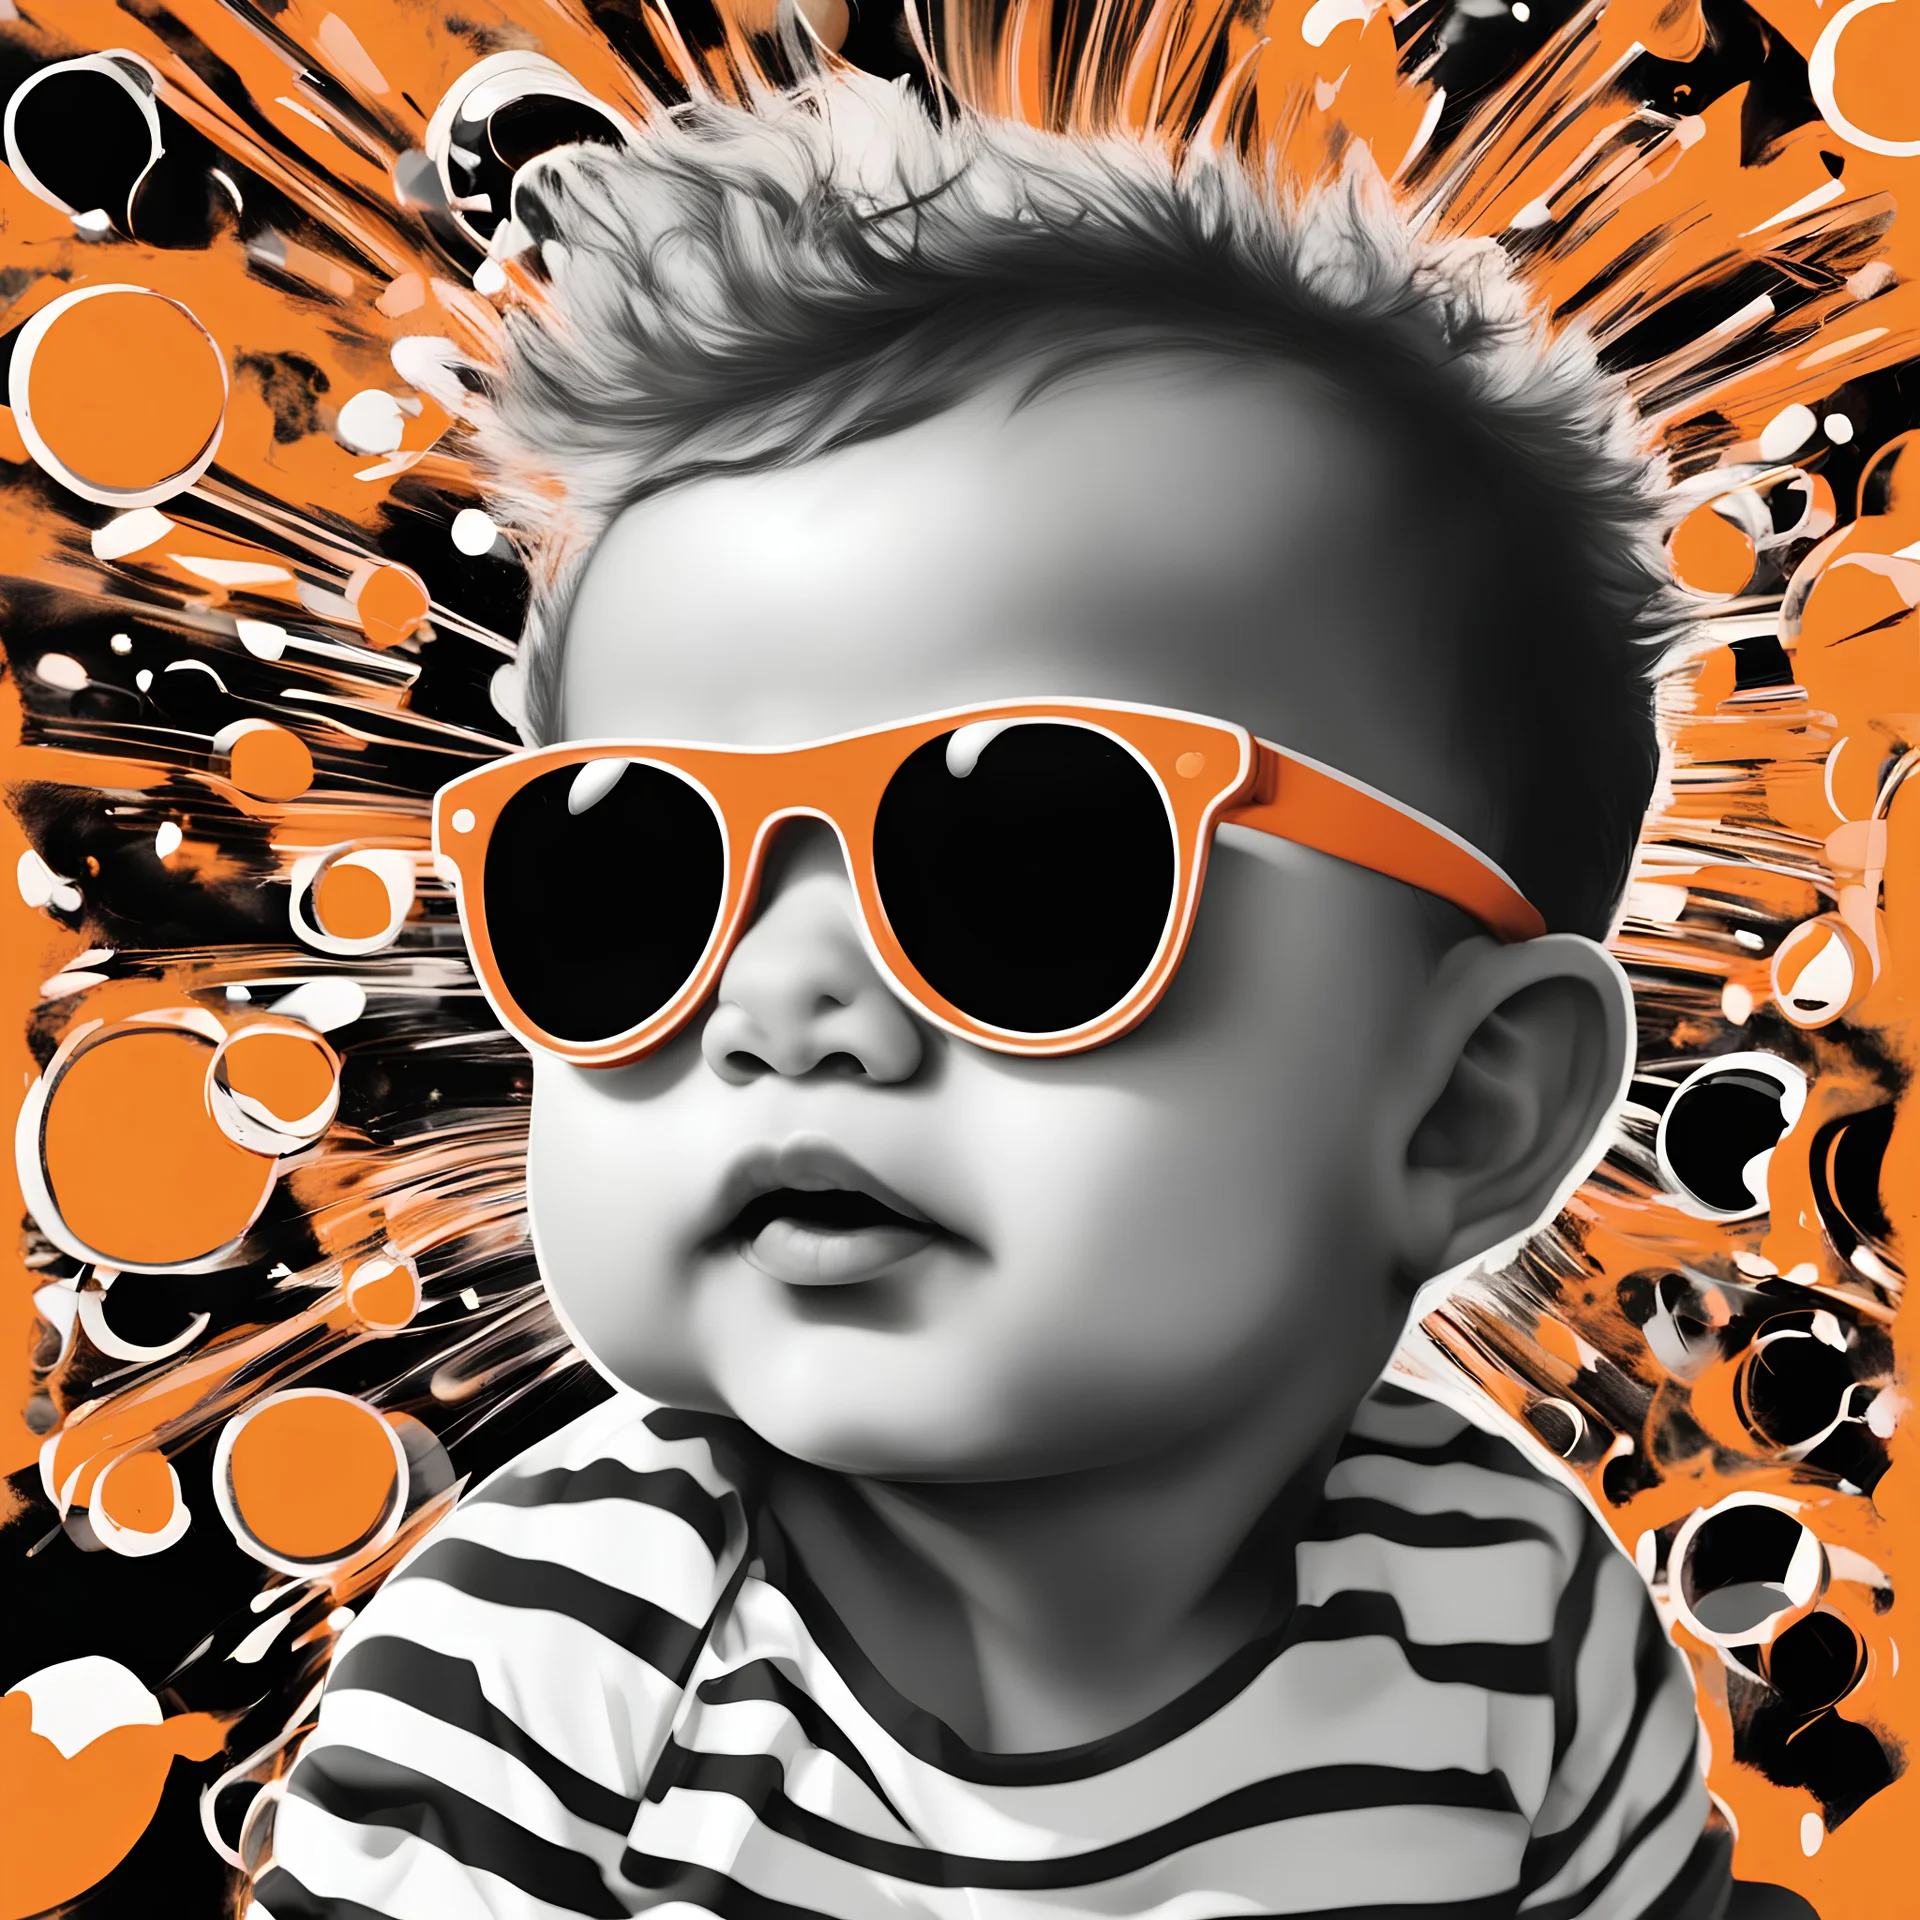 a baby with white sunglasses, black and white, cartoon, orange explosion in the background